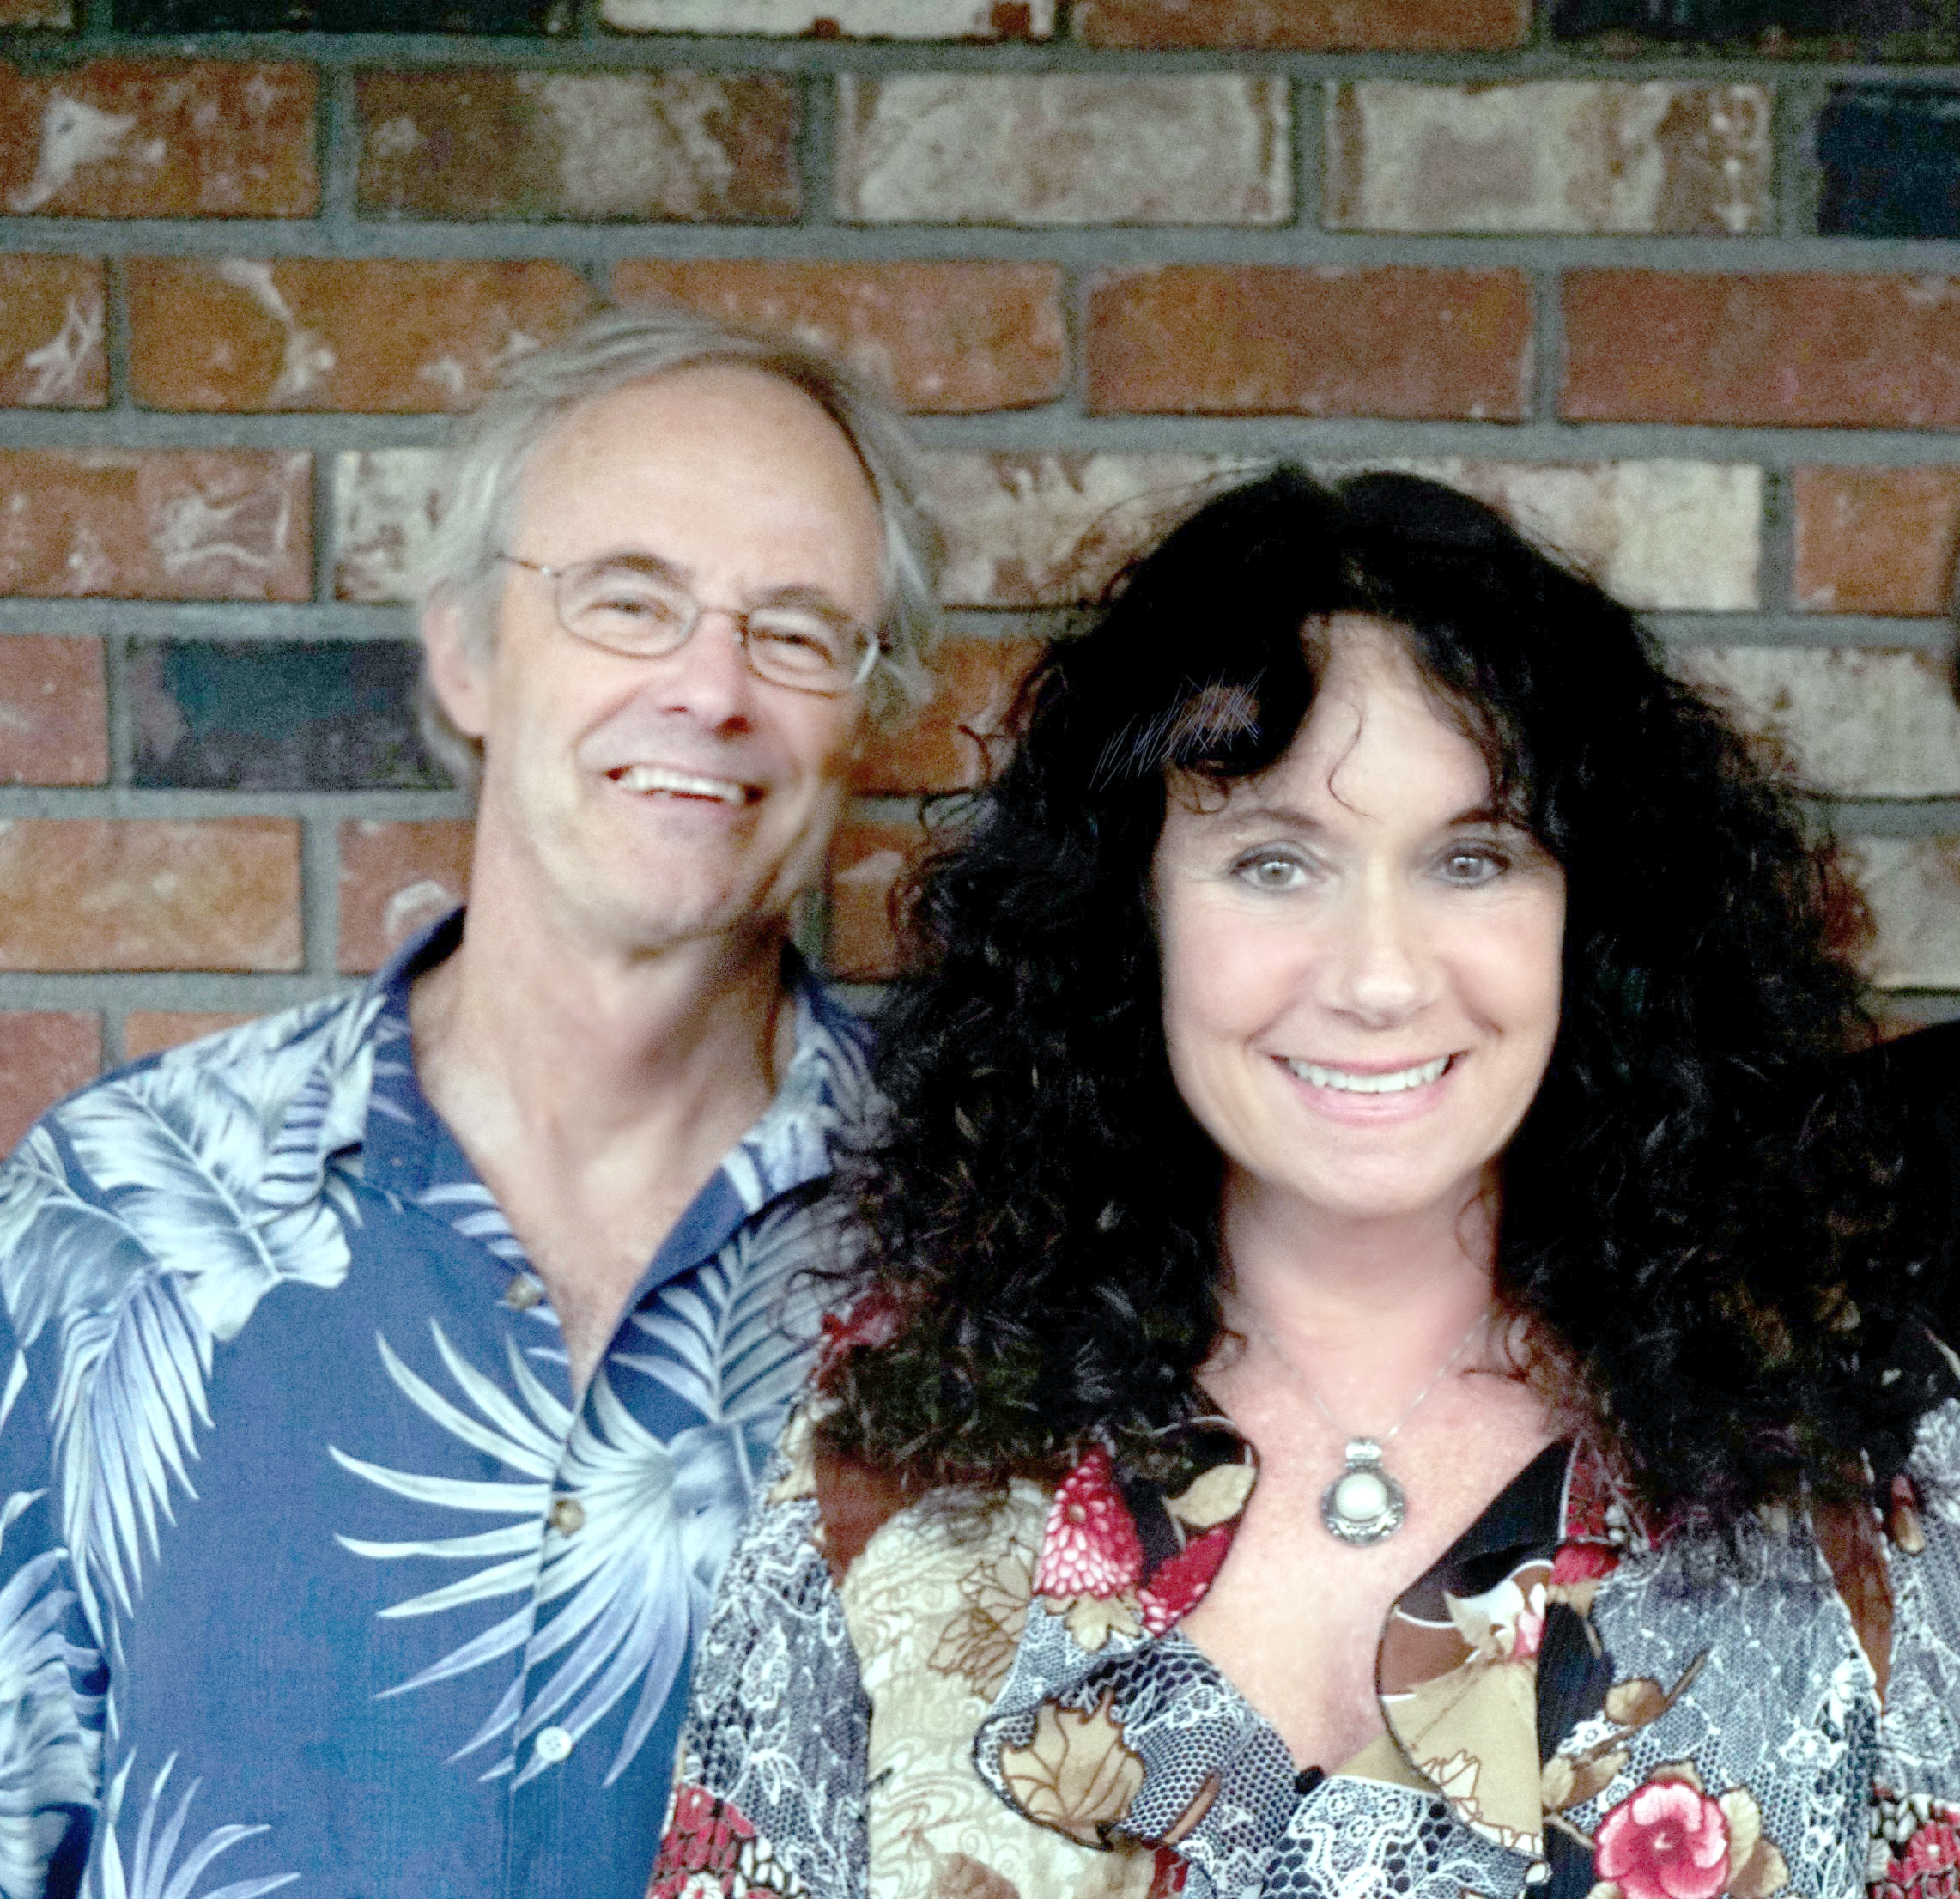 Pianist George Radebaugh and vocalist Robin Bessier are two of the artists appearing in the Steinway piano celebration at the Quimper Unitarian Universalist Fellowship this Saturday evening. ()